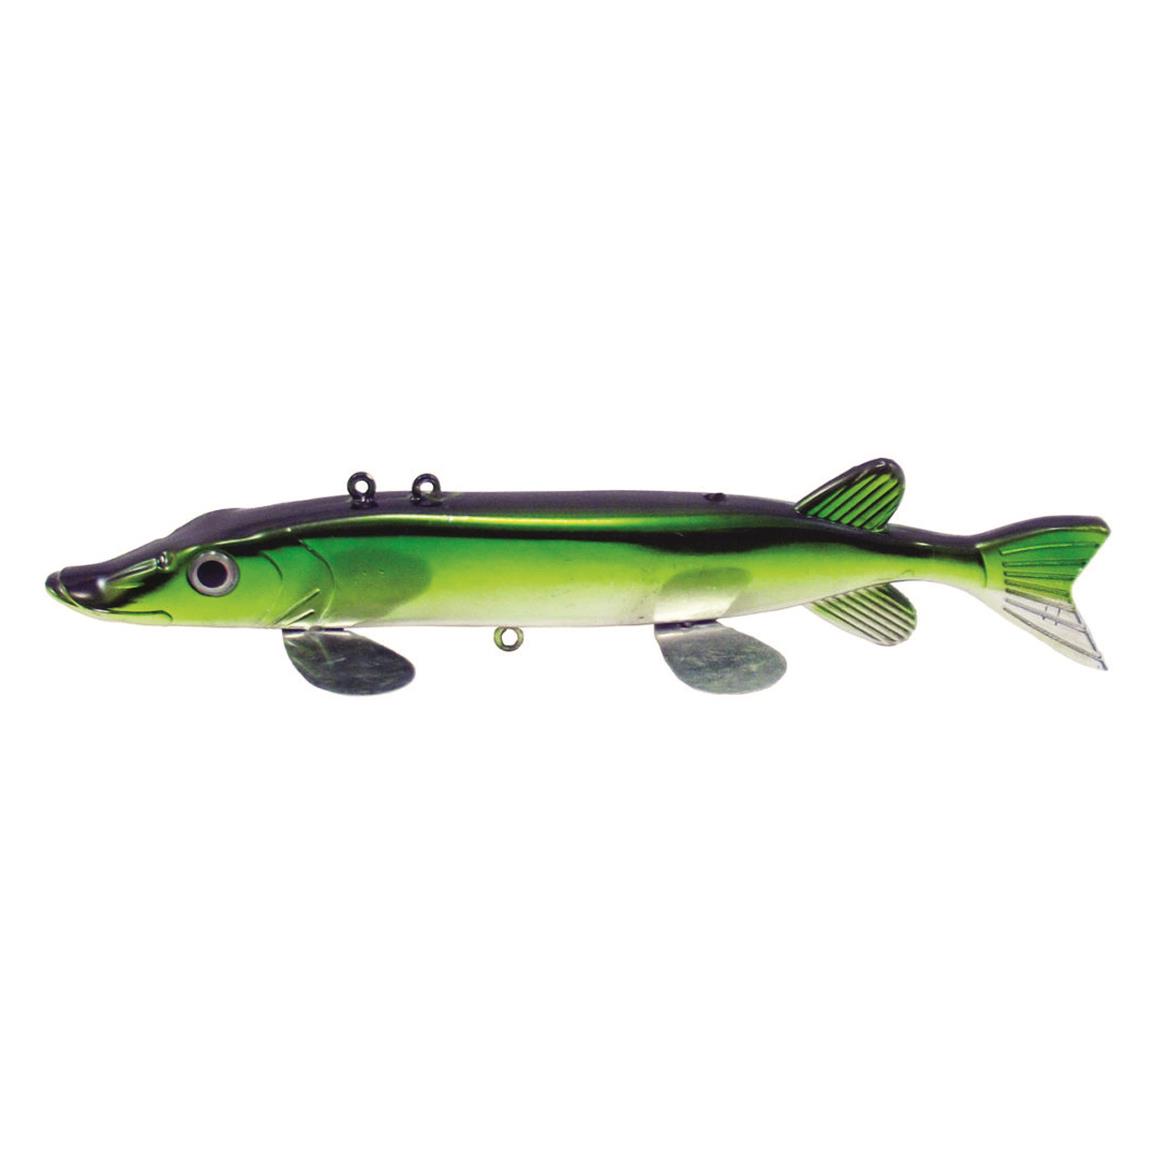 Lakco 7" Plastic Spearing Decoy With Hook, Perch